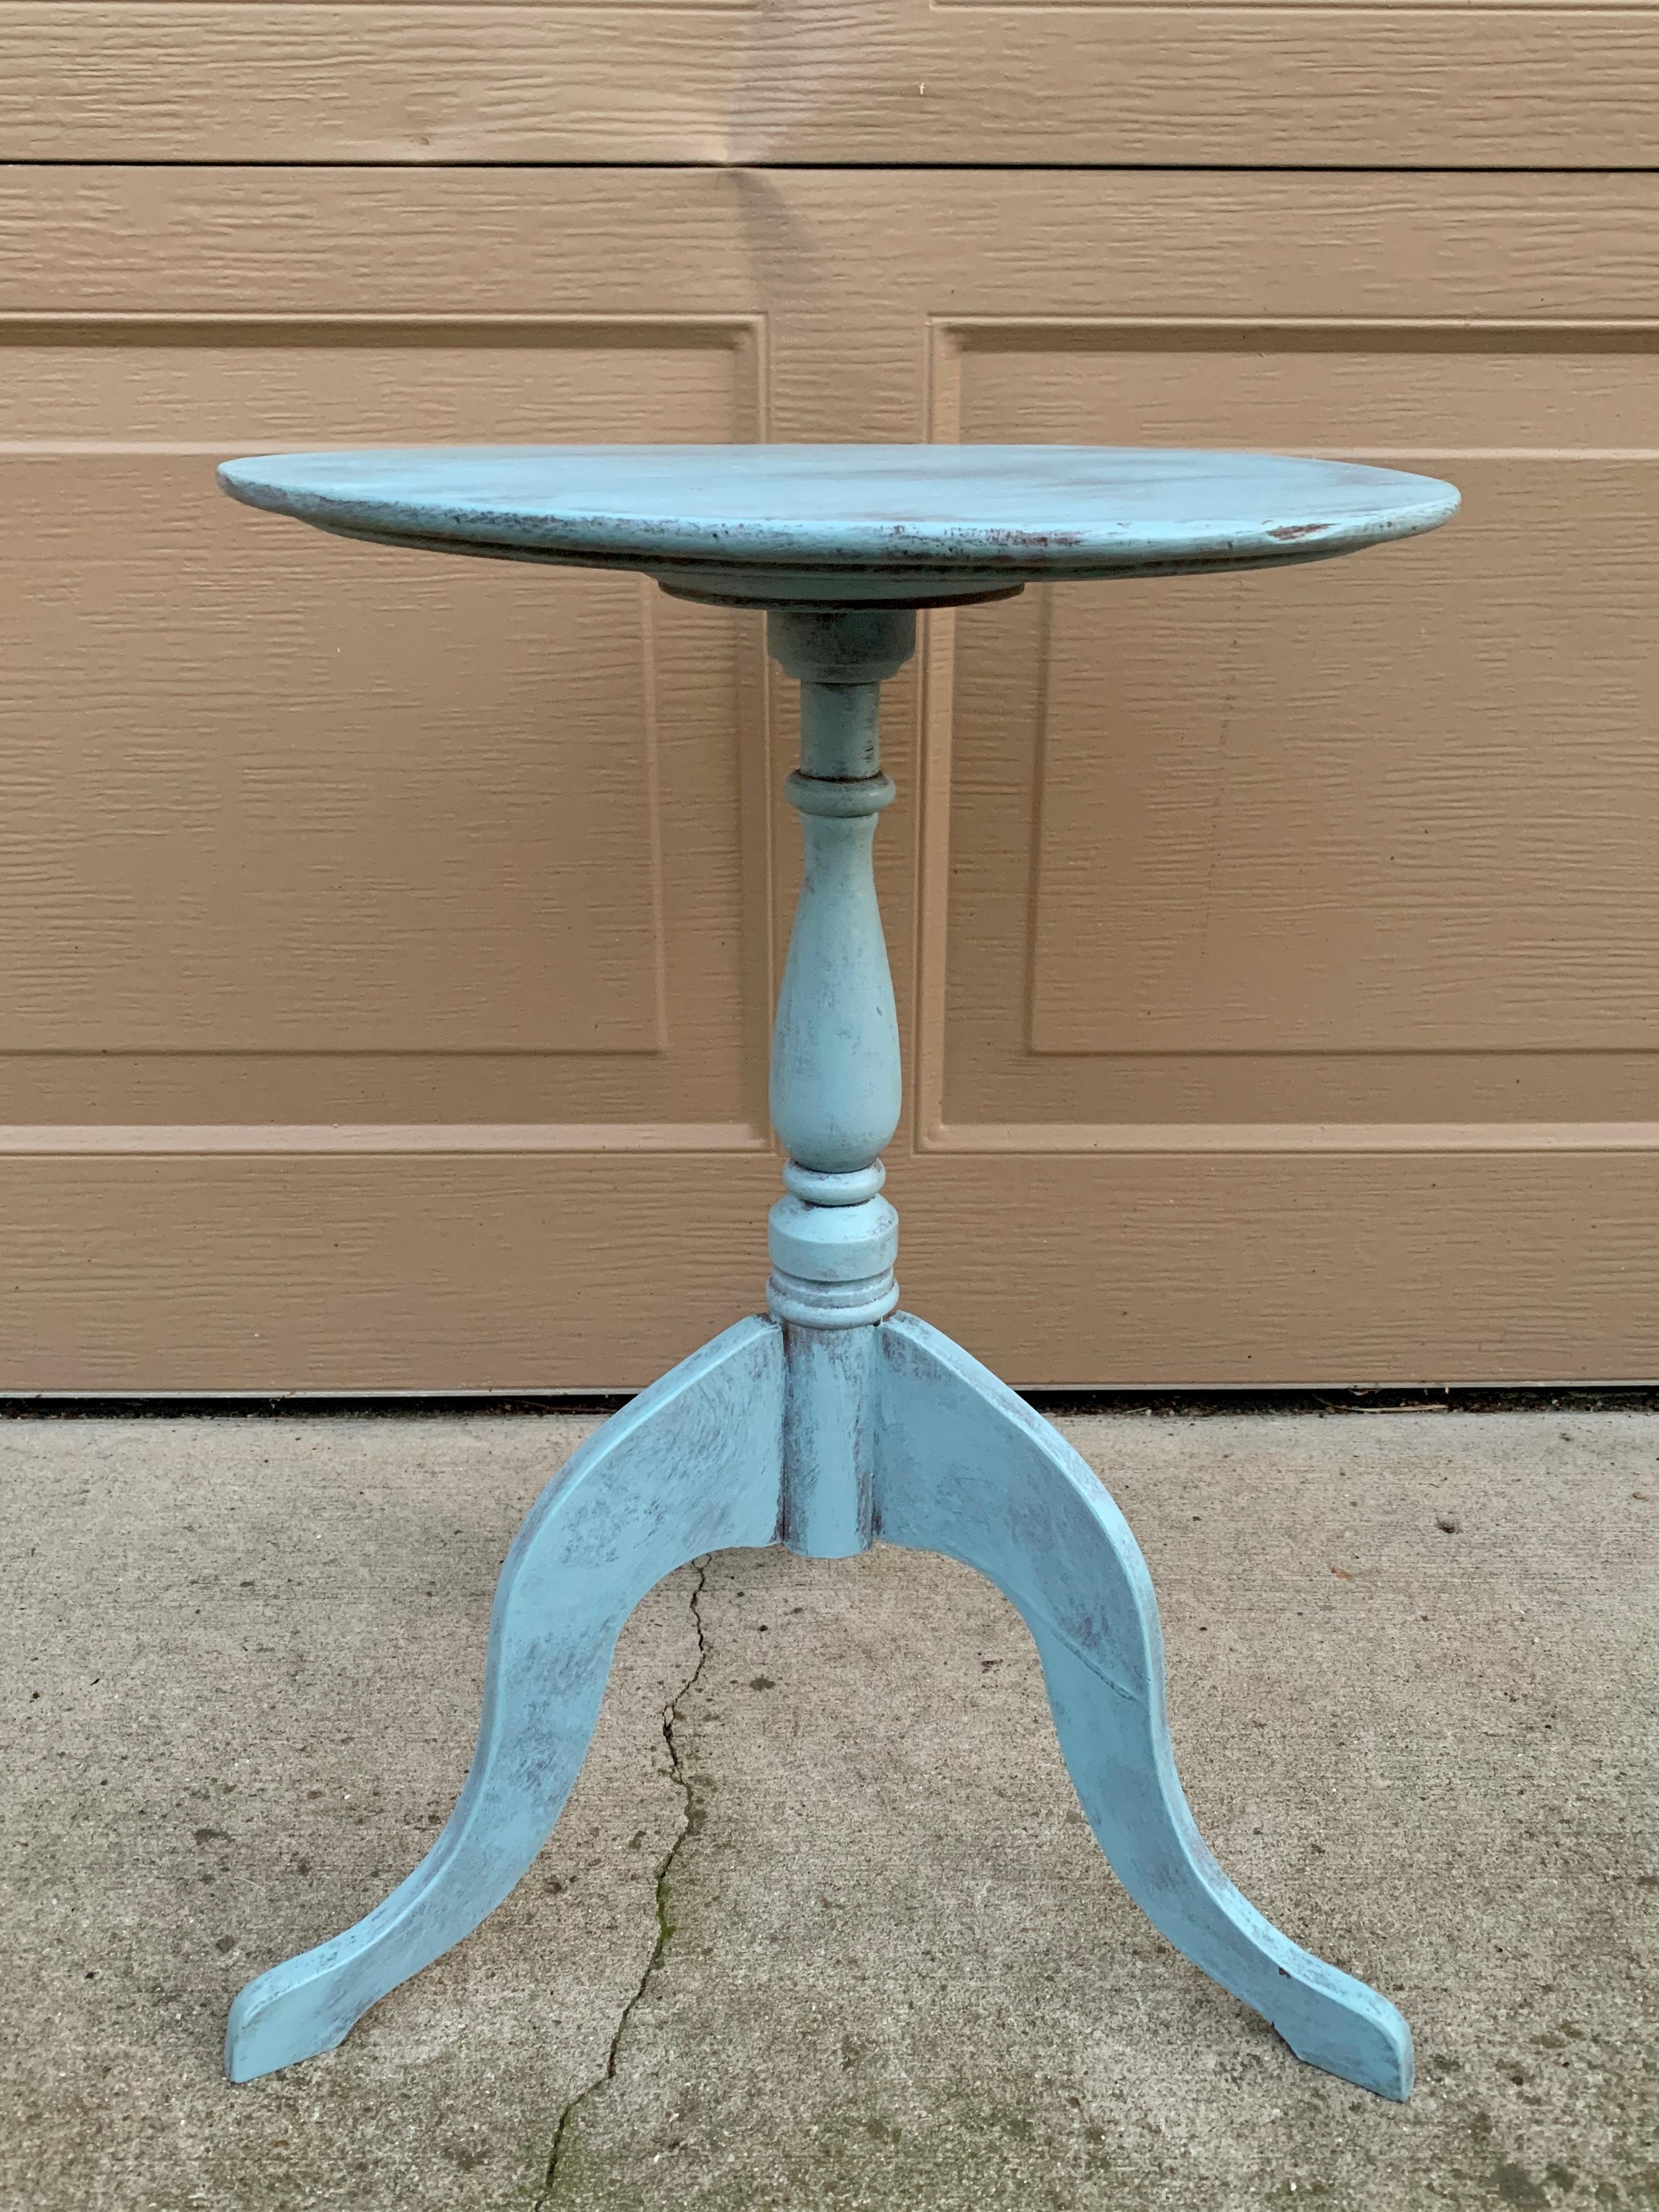 A gorgeous Regency style round side table on three legs

USA, Early 20th Century

Painted walnut in a lovely distressed blue color.

Measures: 14